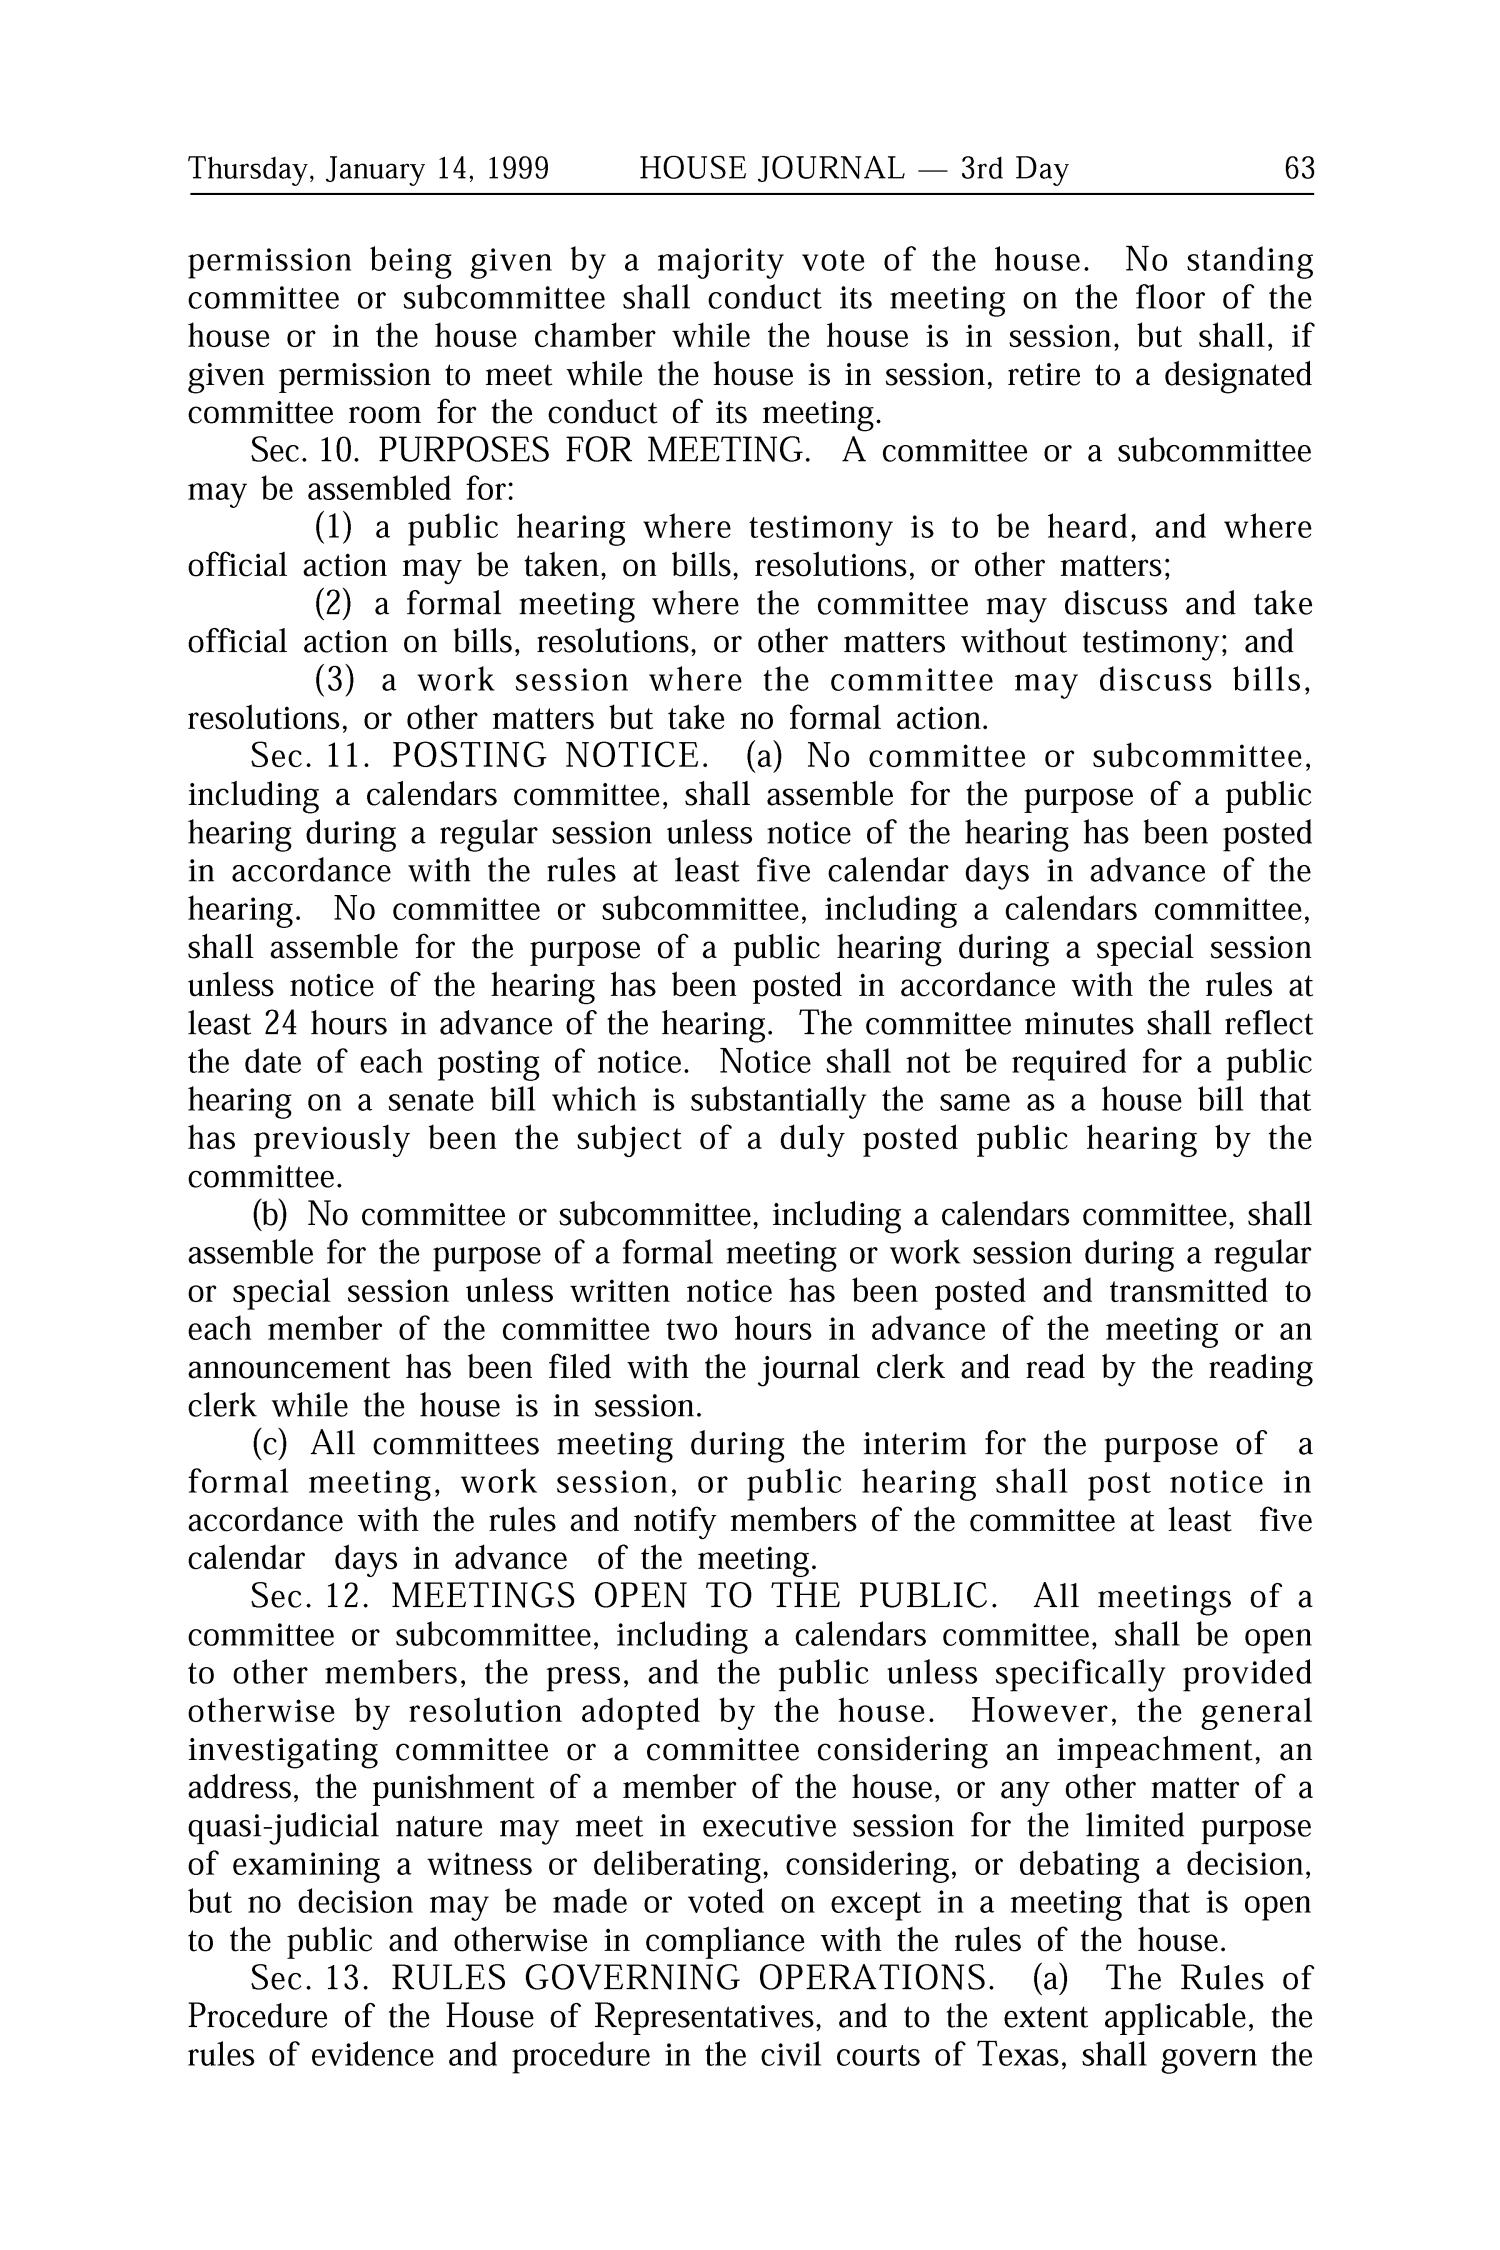 Journal of the House of Representatives of the Regular Session of the Seventy-Sixth Legislature of the State of Texas, Volume 1
                                                
                                                    63
                                                